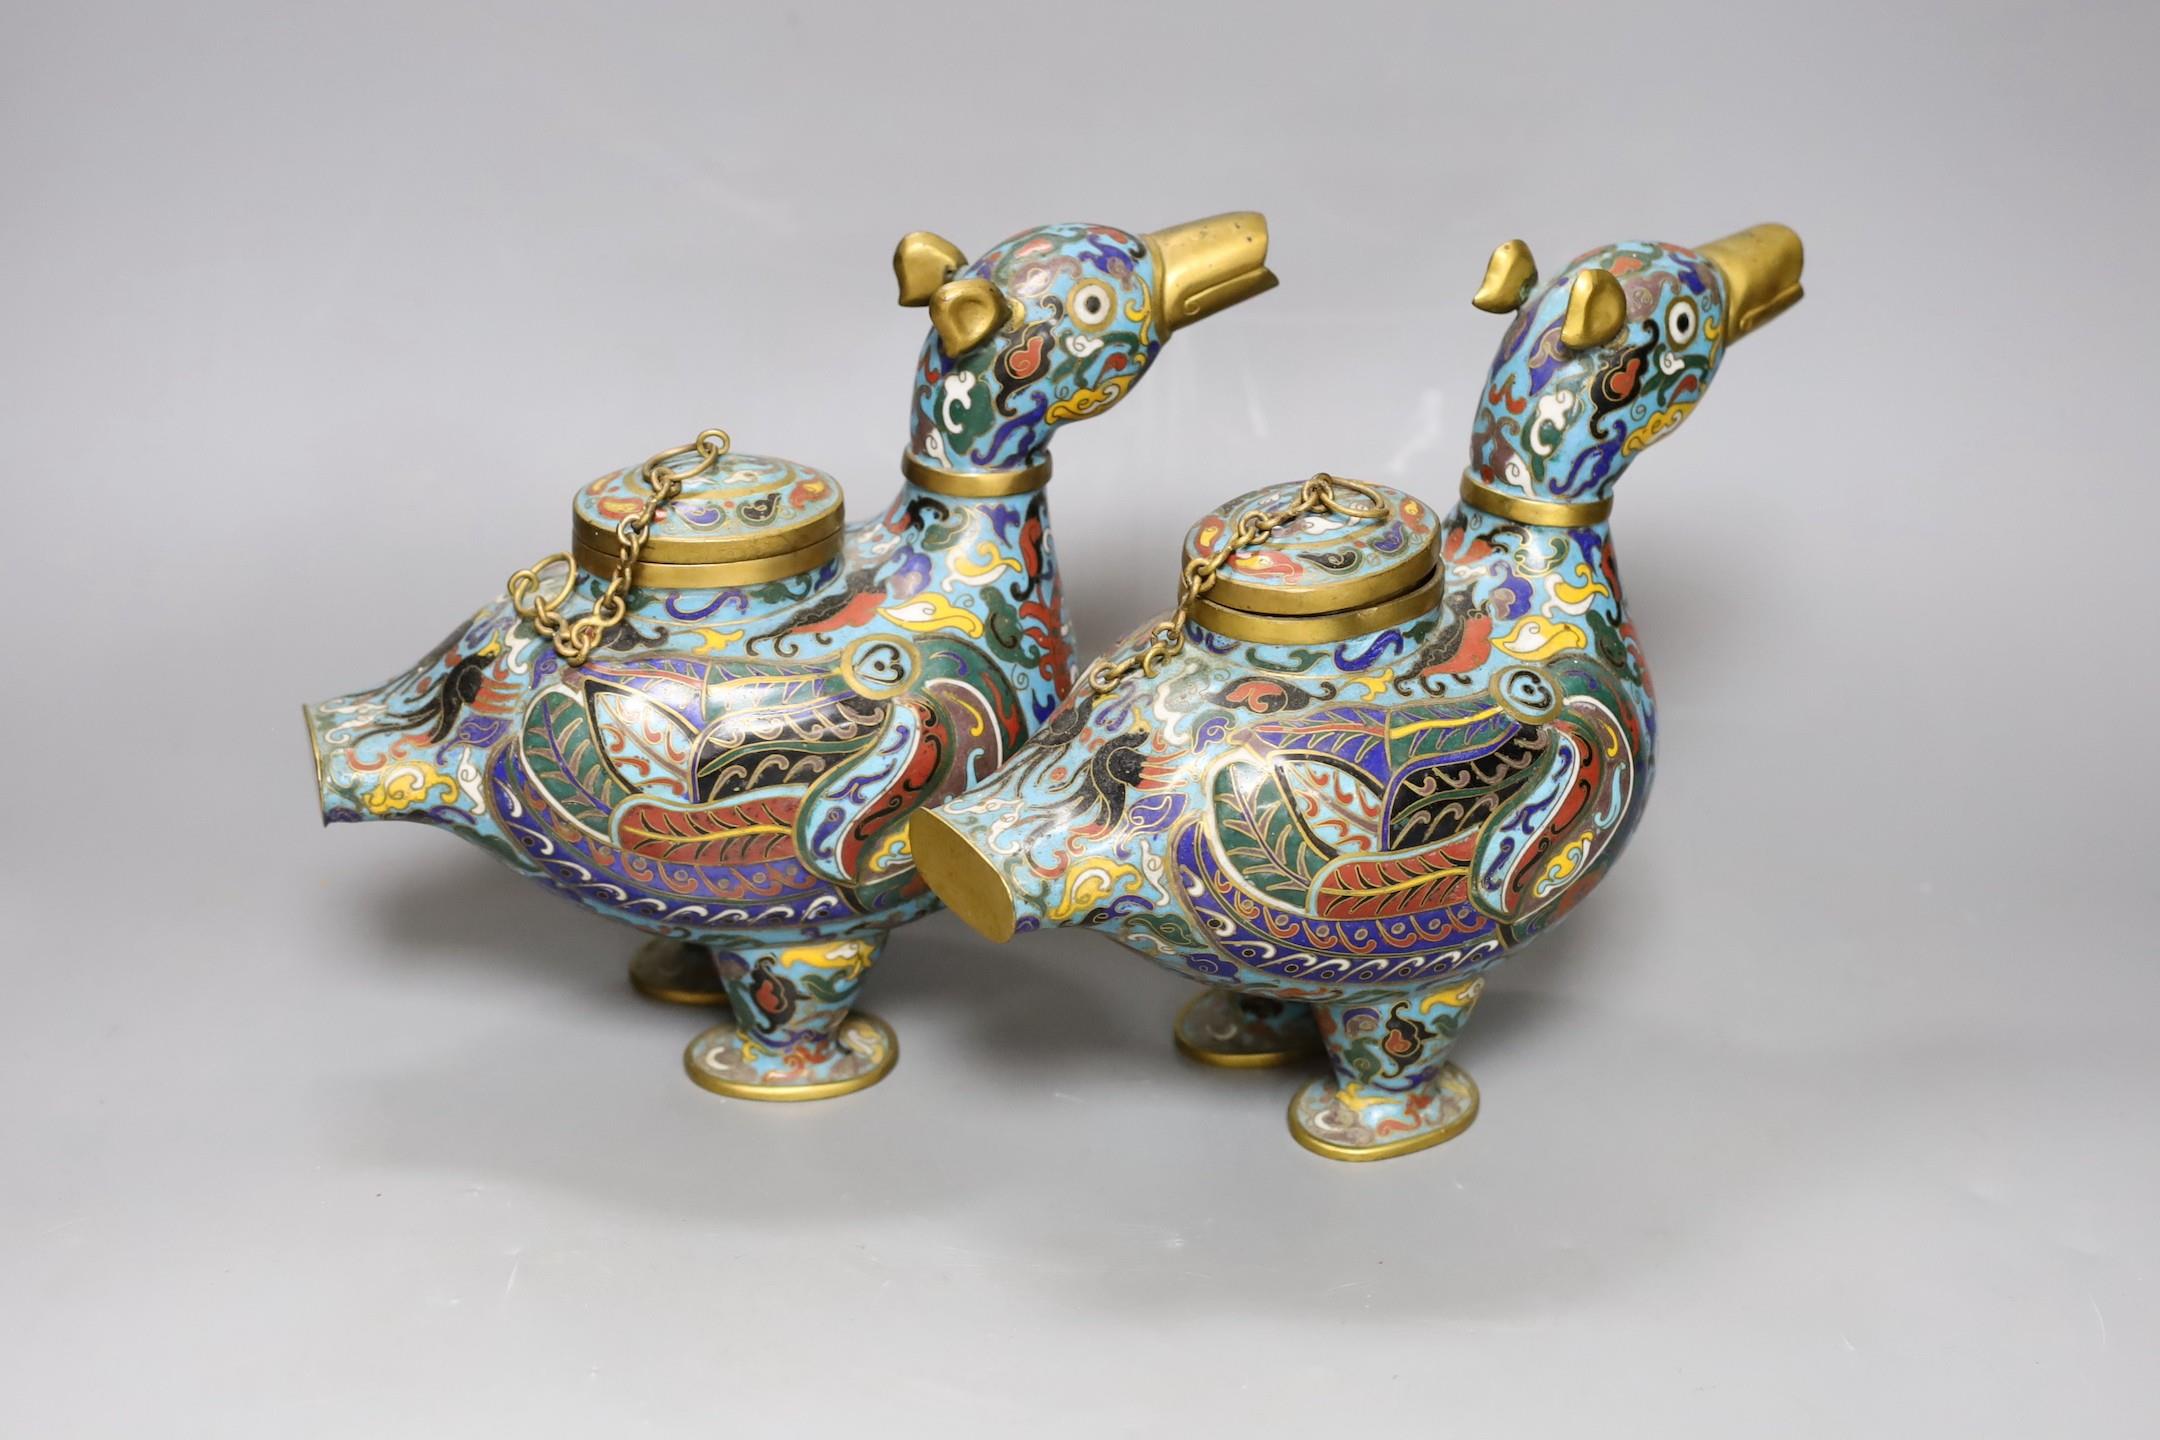 A pair of 20th century Chinese cloisonné enamel ‘duck’ vessels, 20cm - Image 2 of 3